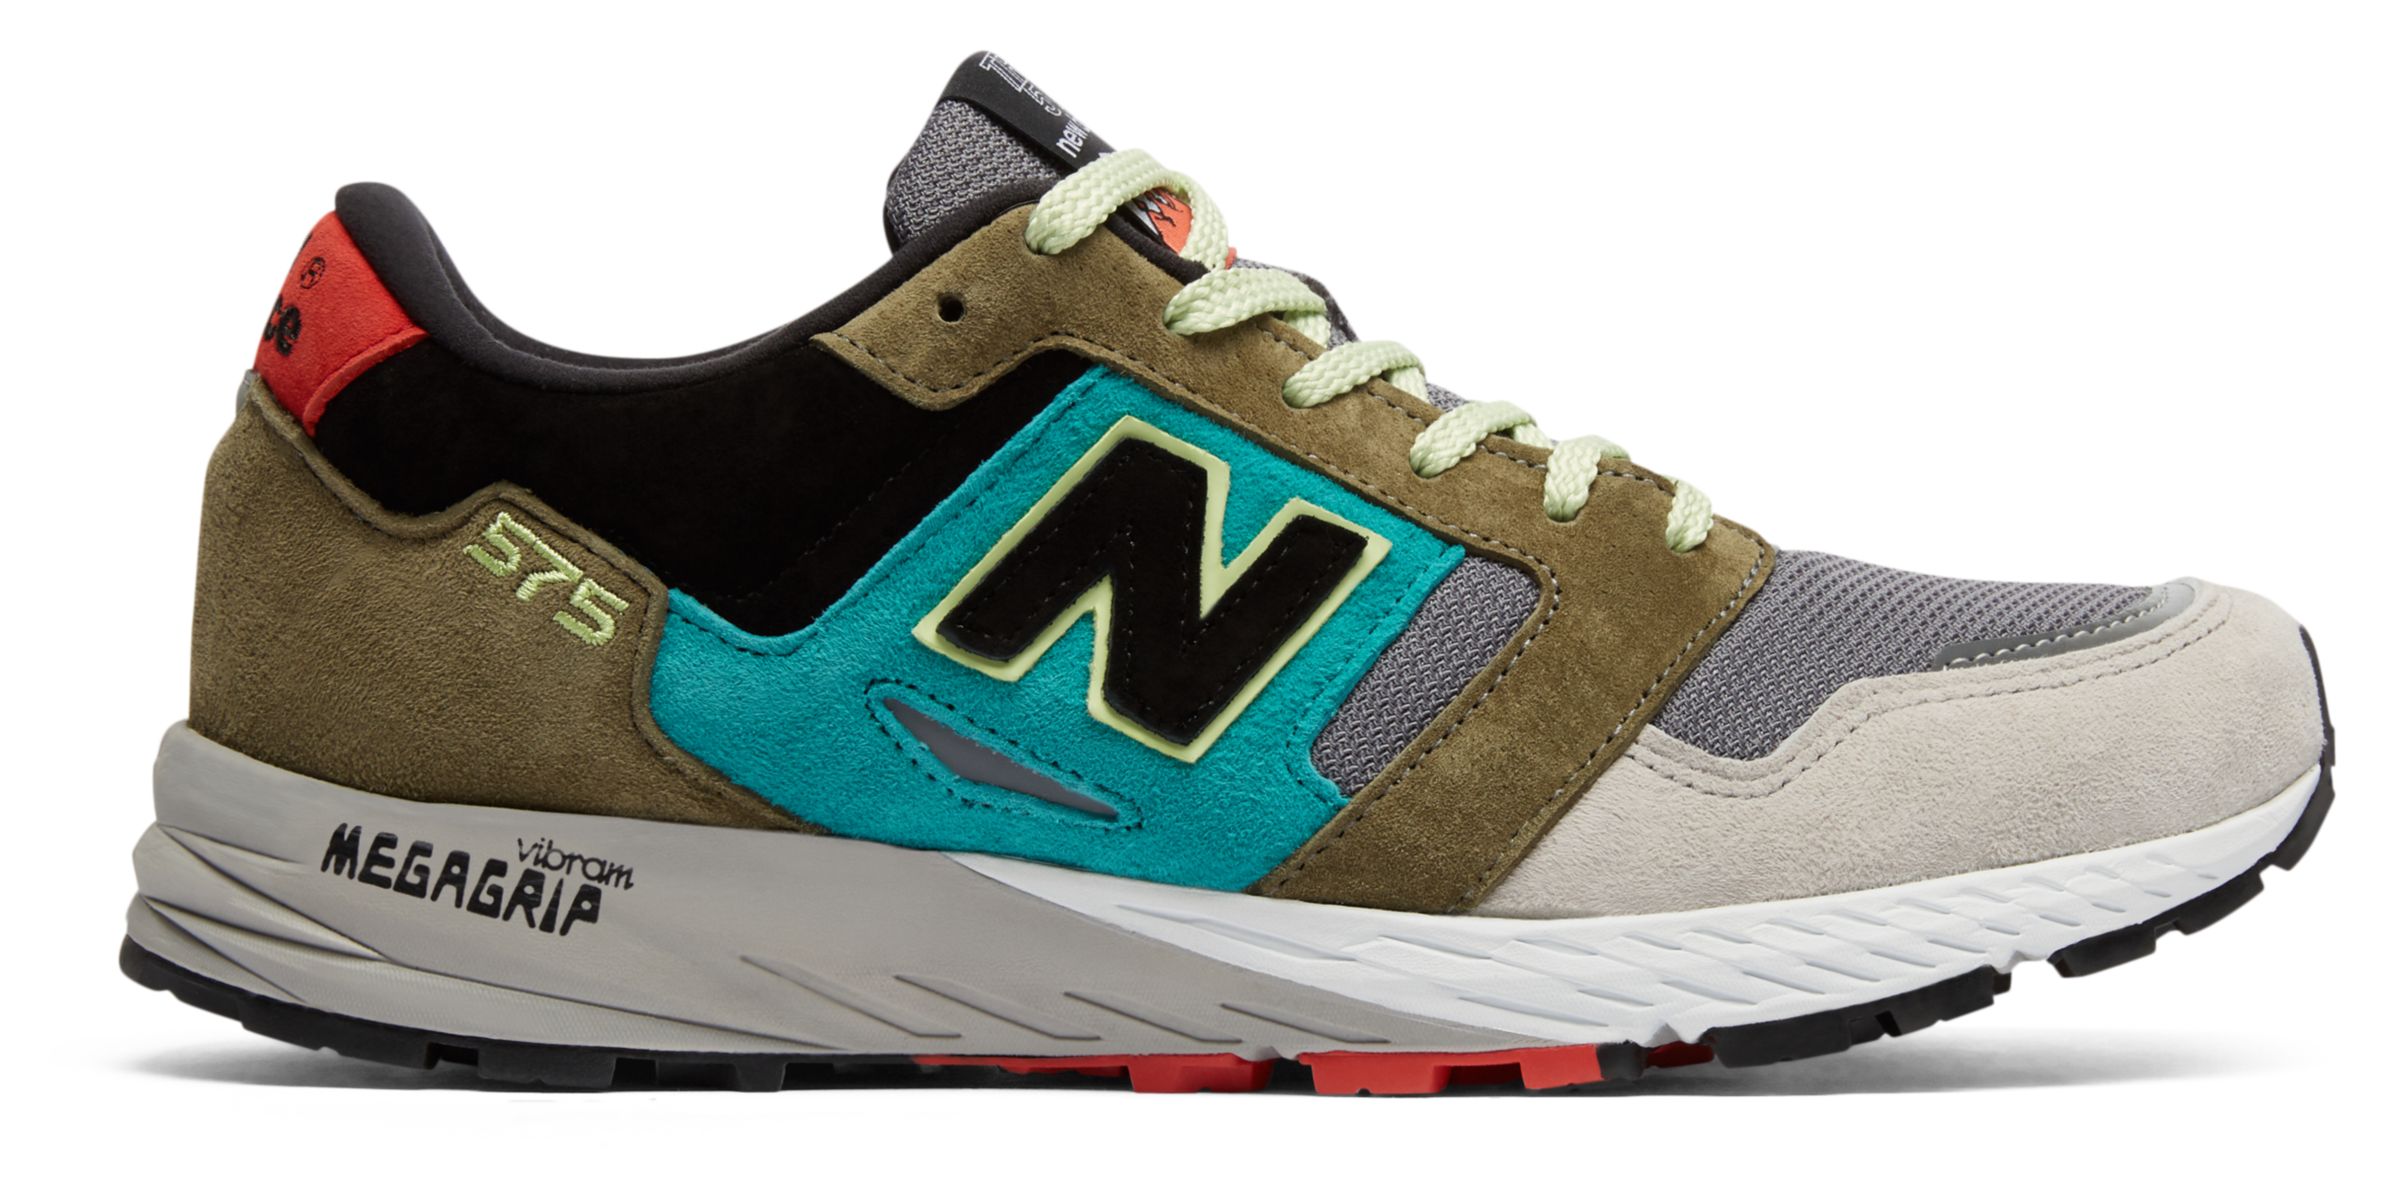 Men's MTL575 Made in UK Lifestyle Shoes - New Balance